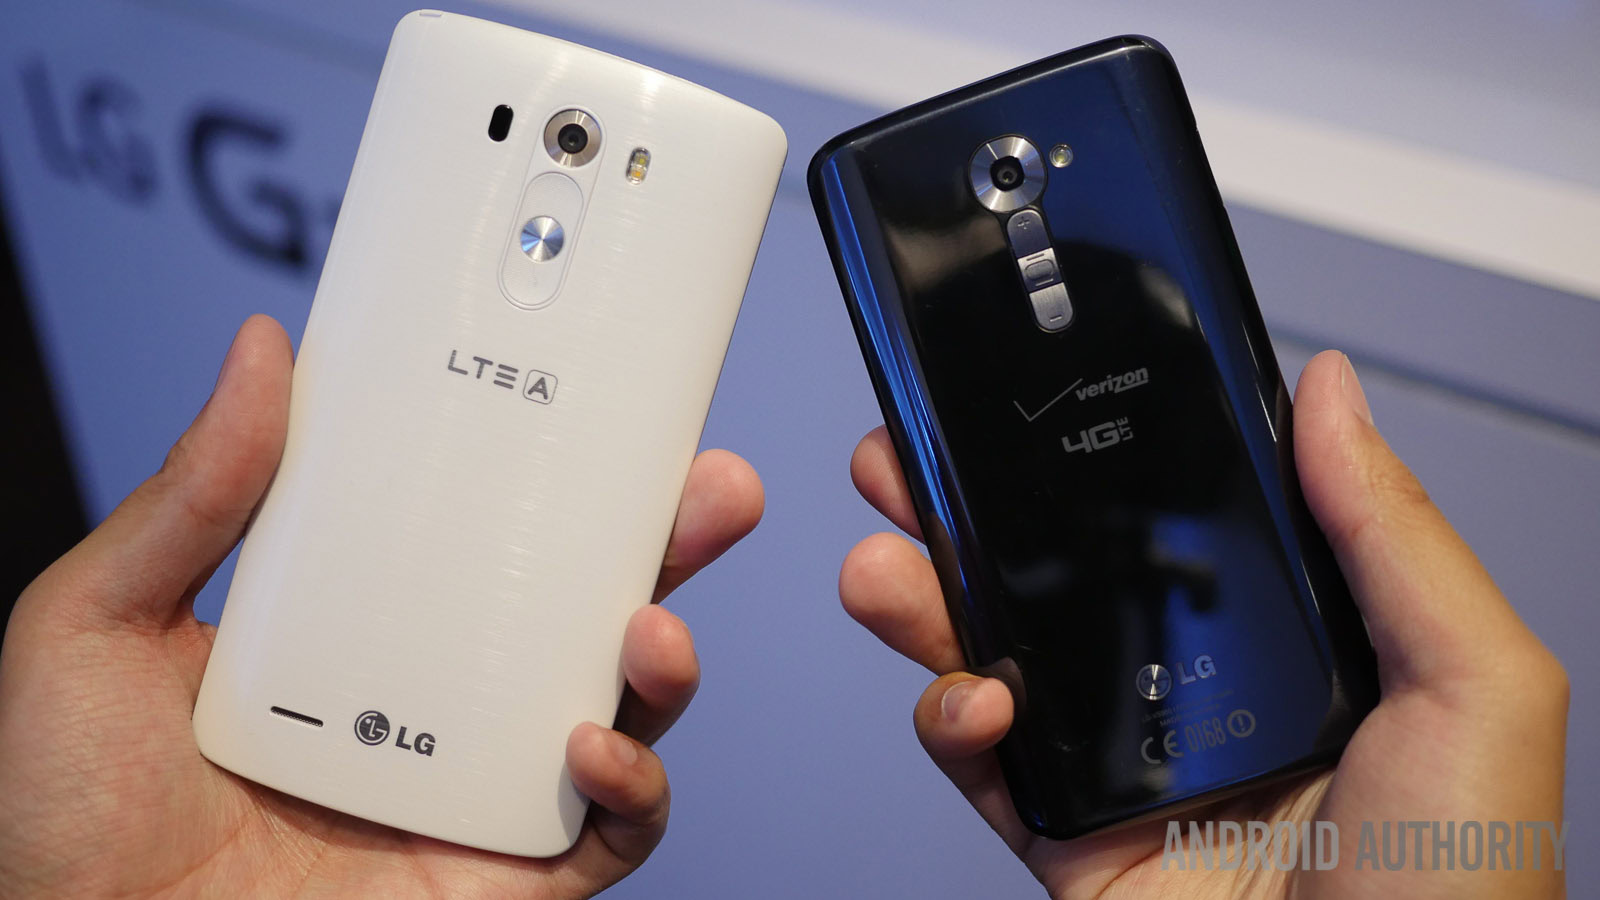 G2 and G3 compared, how will the LG G4 differ?